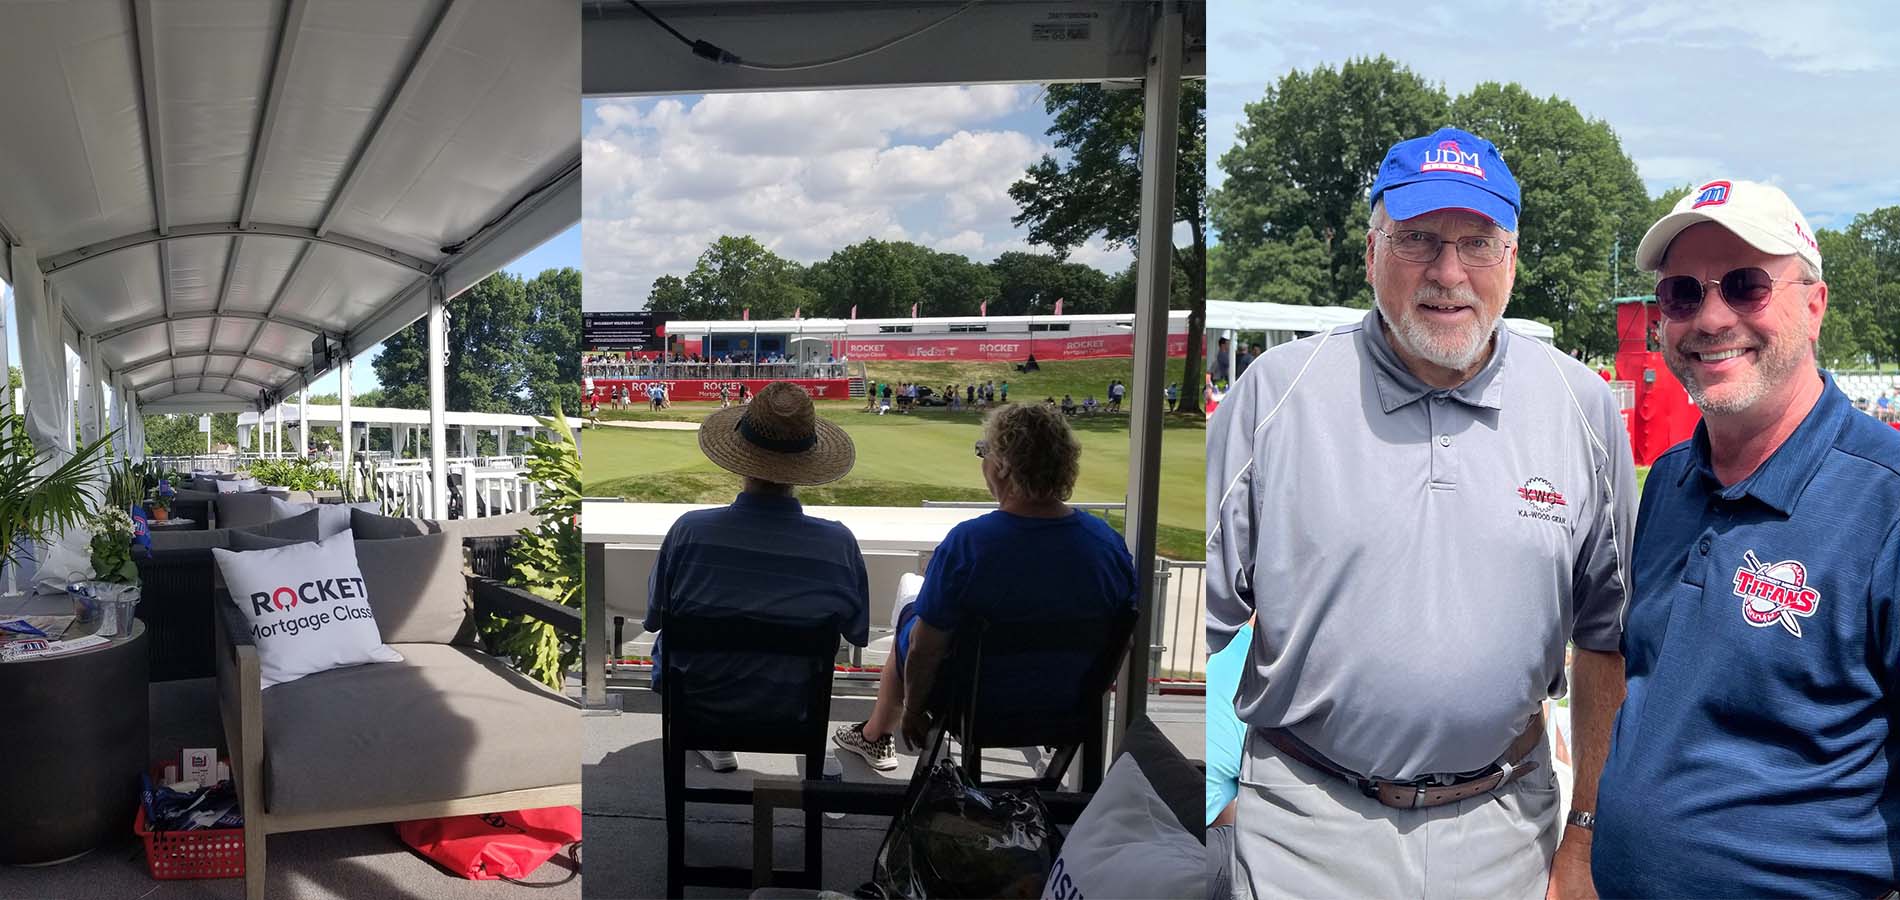 Three photos feature pictures of the suite at the Rocket Mortgage Classic, including people watching the golf tournament and at right two people wearing Titans gear posing for a photo.